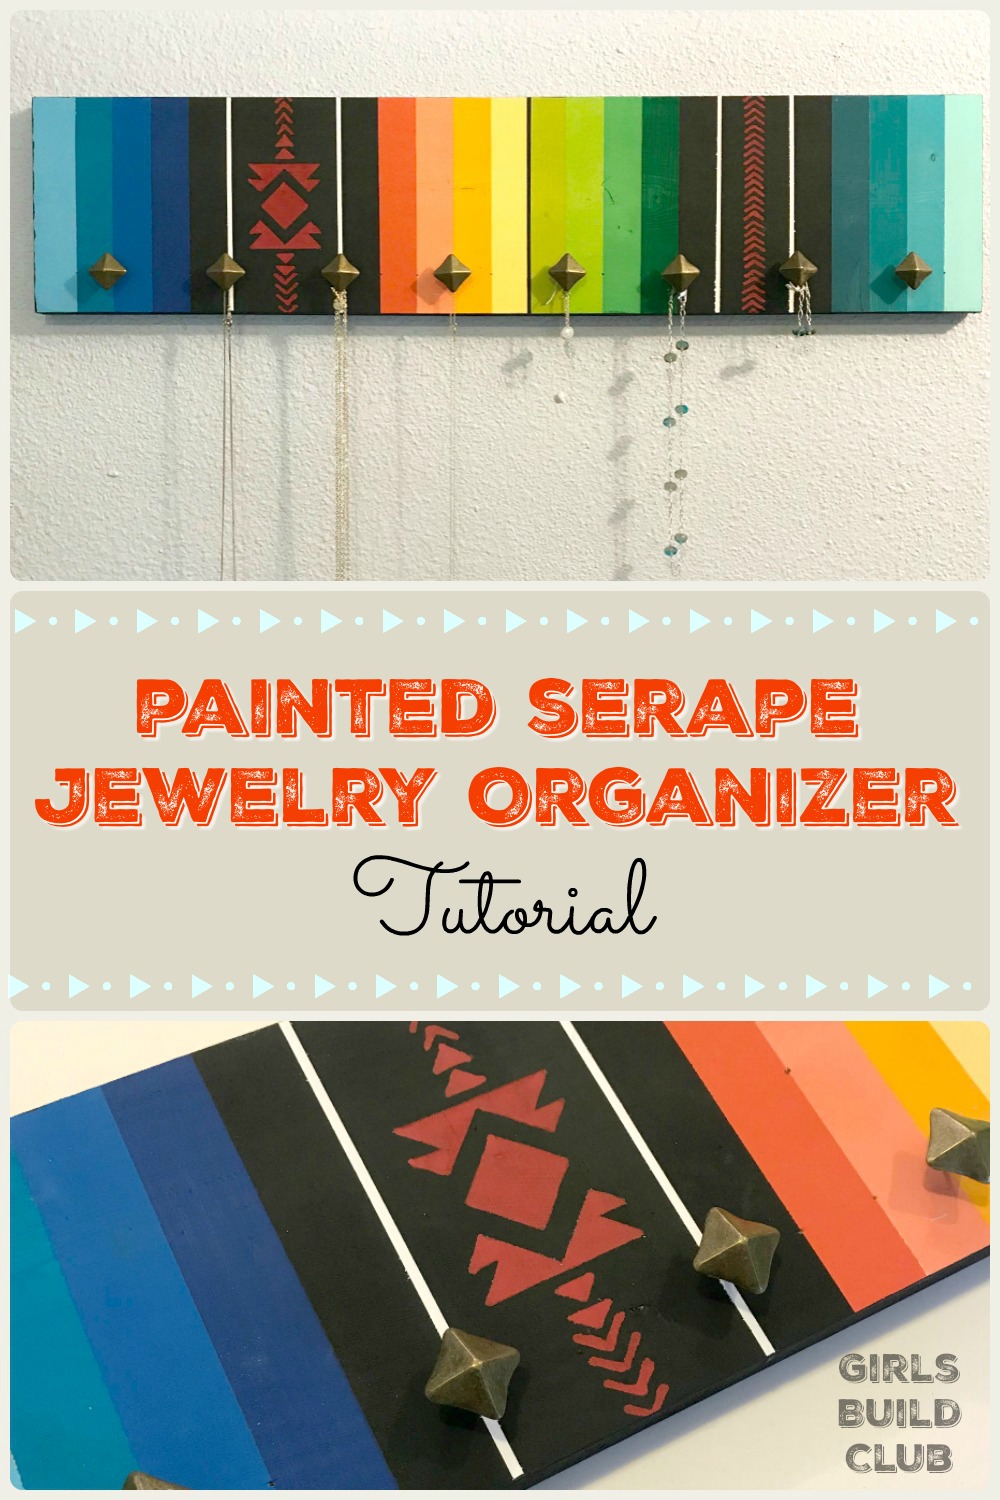 Organize your jewelry with this easy diy! All you need is scrap wood, paint and, furniture nails. Inspired by mexican serape blankets. This goes great with southwestern style, boho chic, bohemian, gypsy style, surf shack, beachy coastal. Easy painted scrapwood diy project.